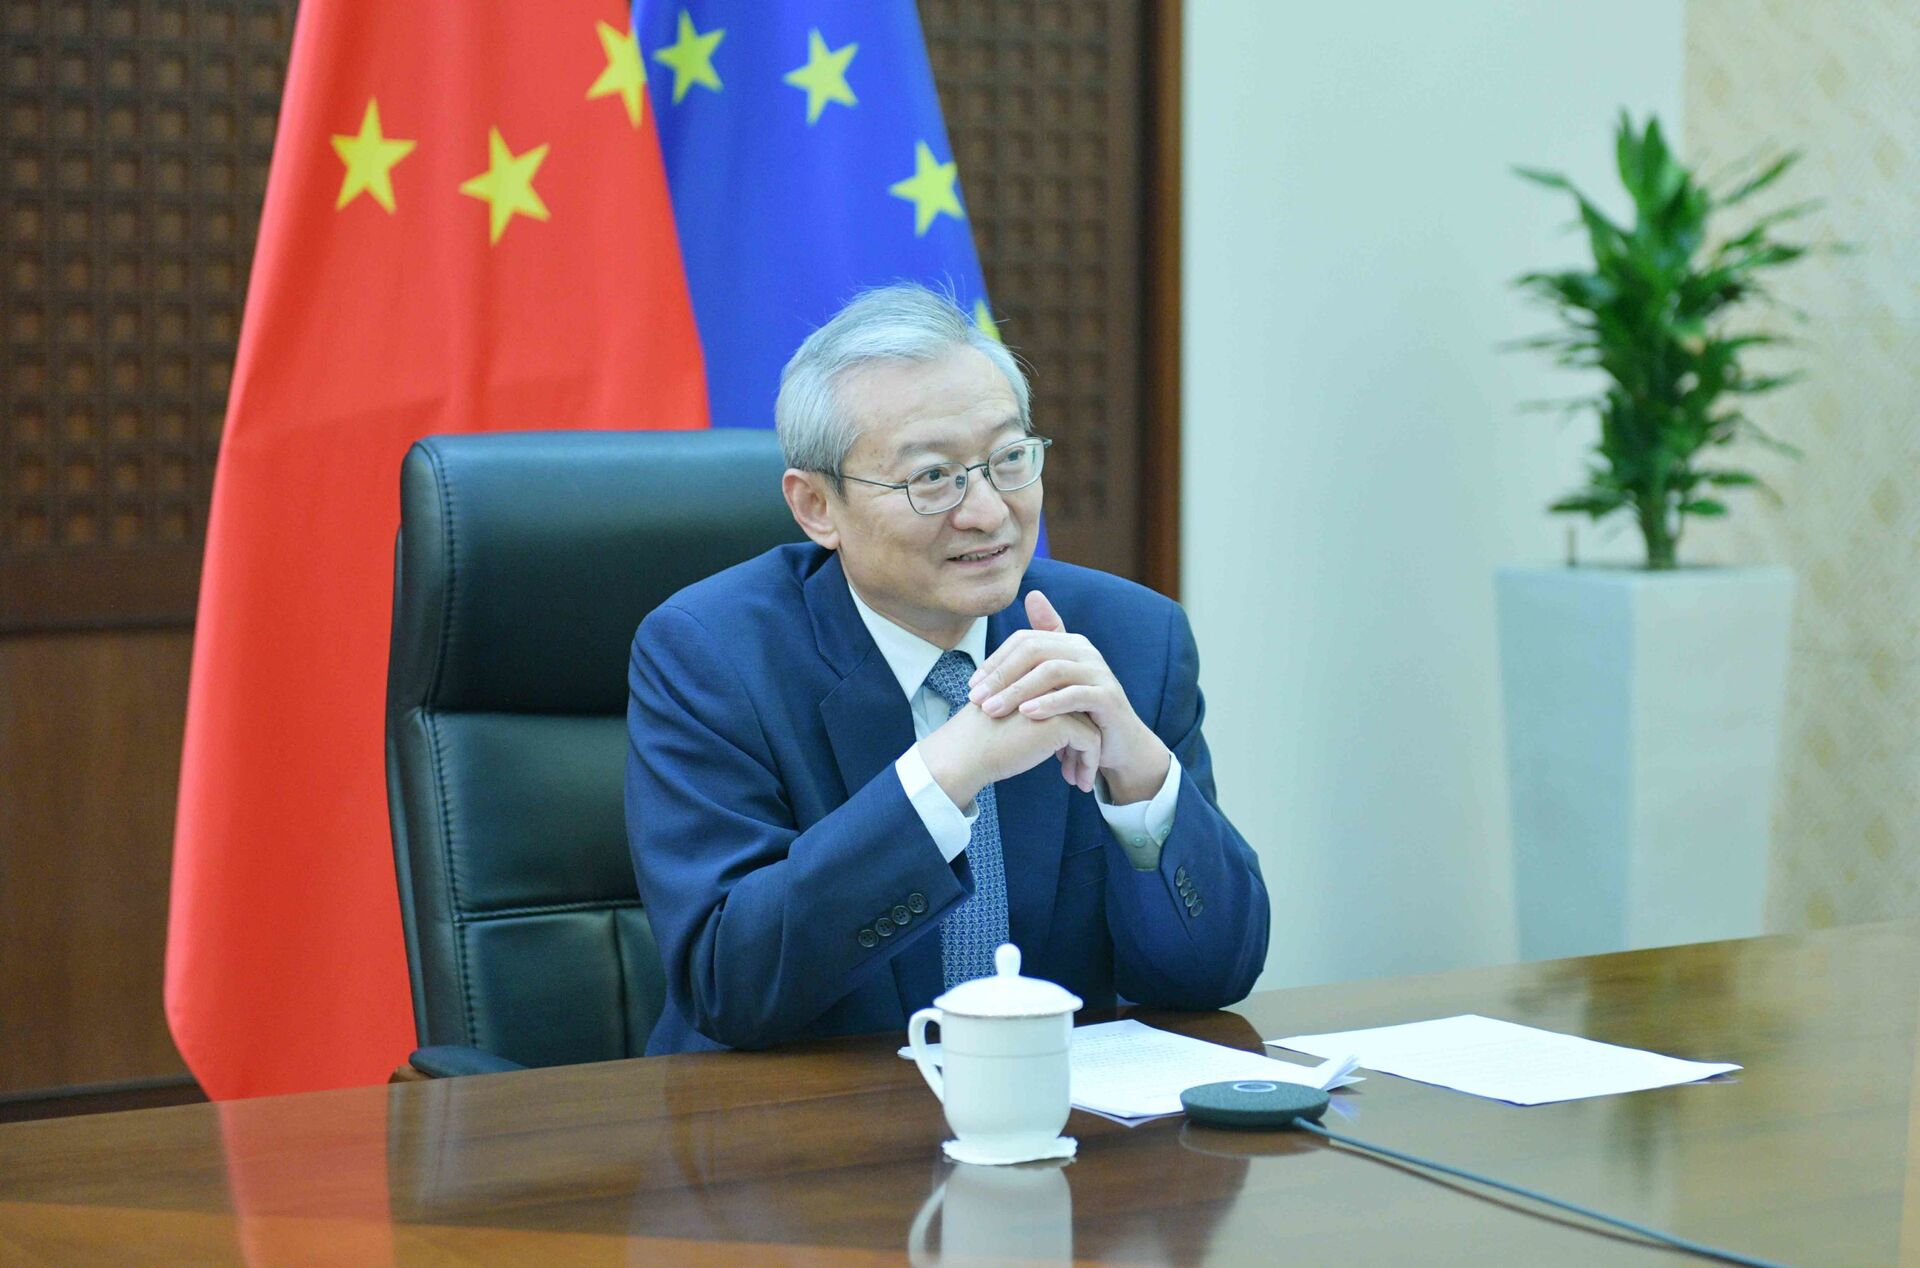 Ambassador Zhang Ming, Head of the Chinese Mission to the EU, gives an interview to CGTN Europe correspondent Nawied Jabarkhyl in June 2020 - Sputnik International, 1920, 16.11.2021